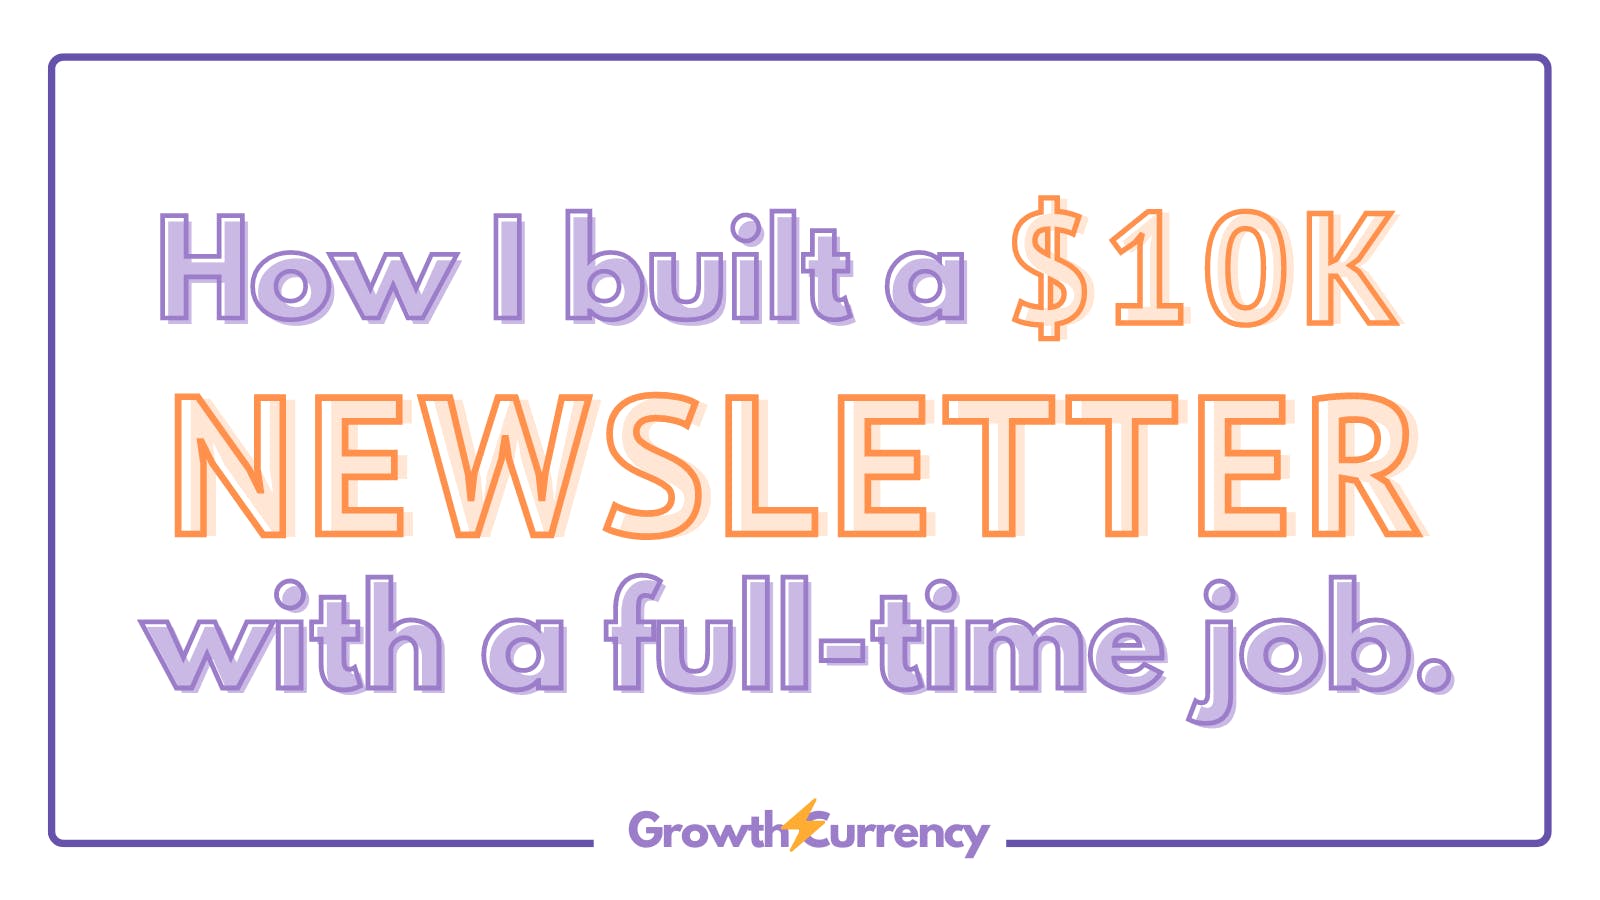 How I built a $10k Newsletter with a Full-Time Job